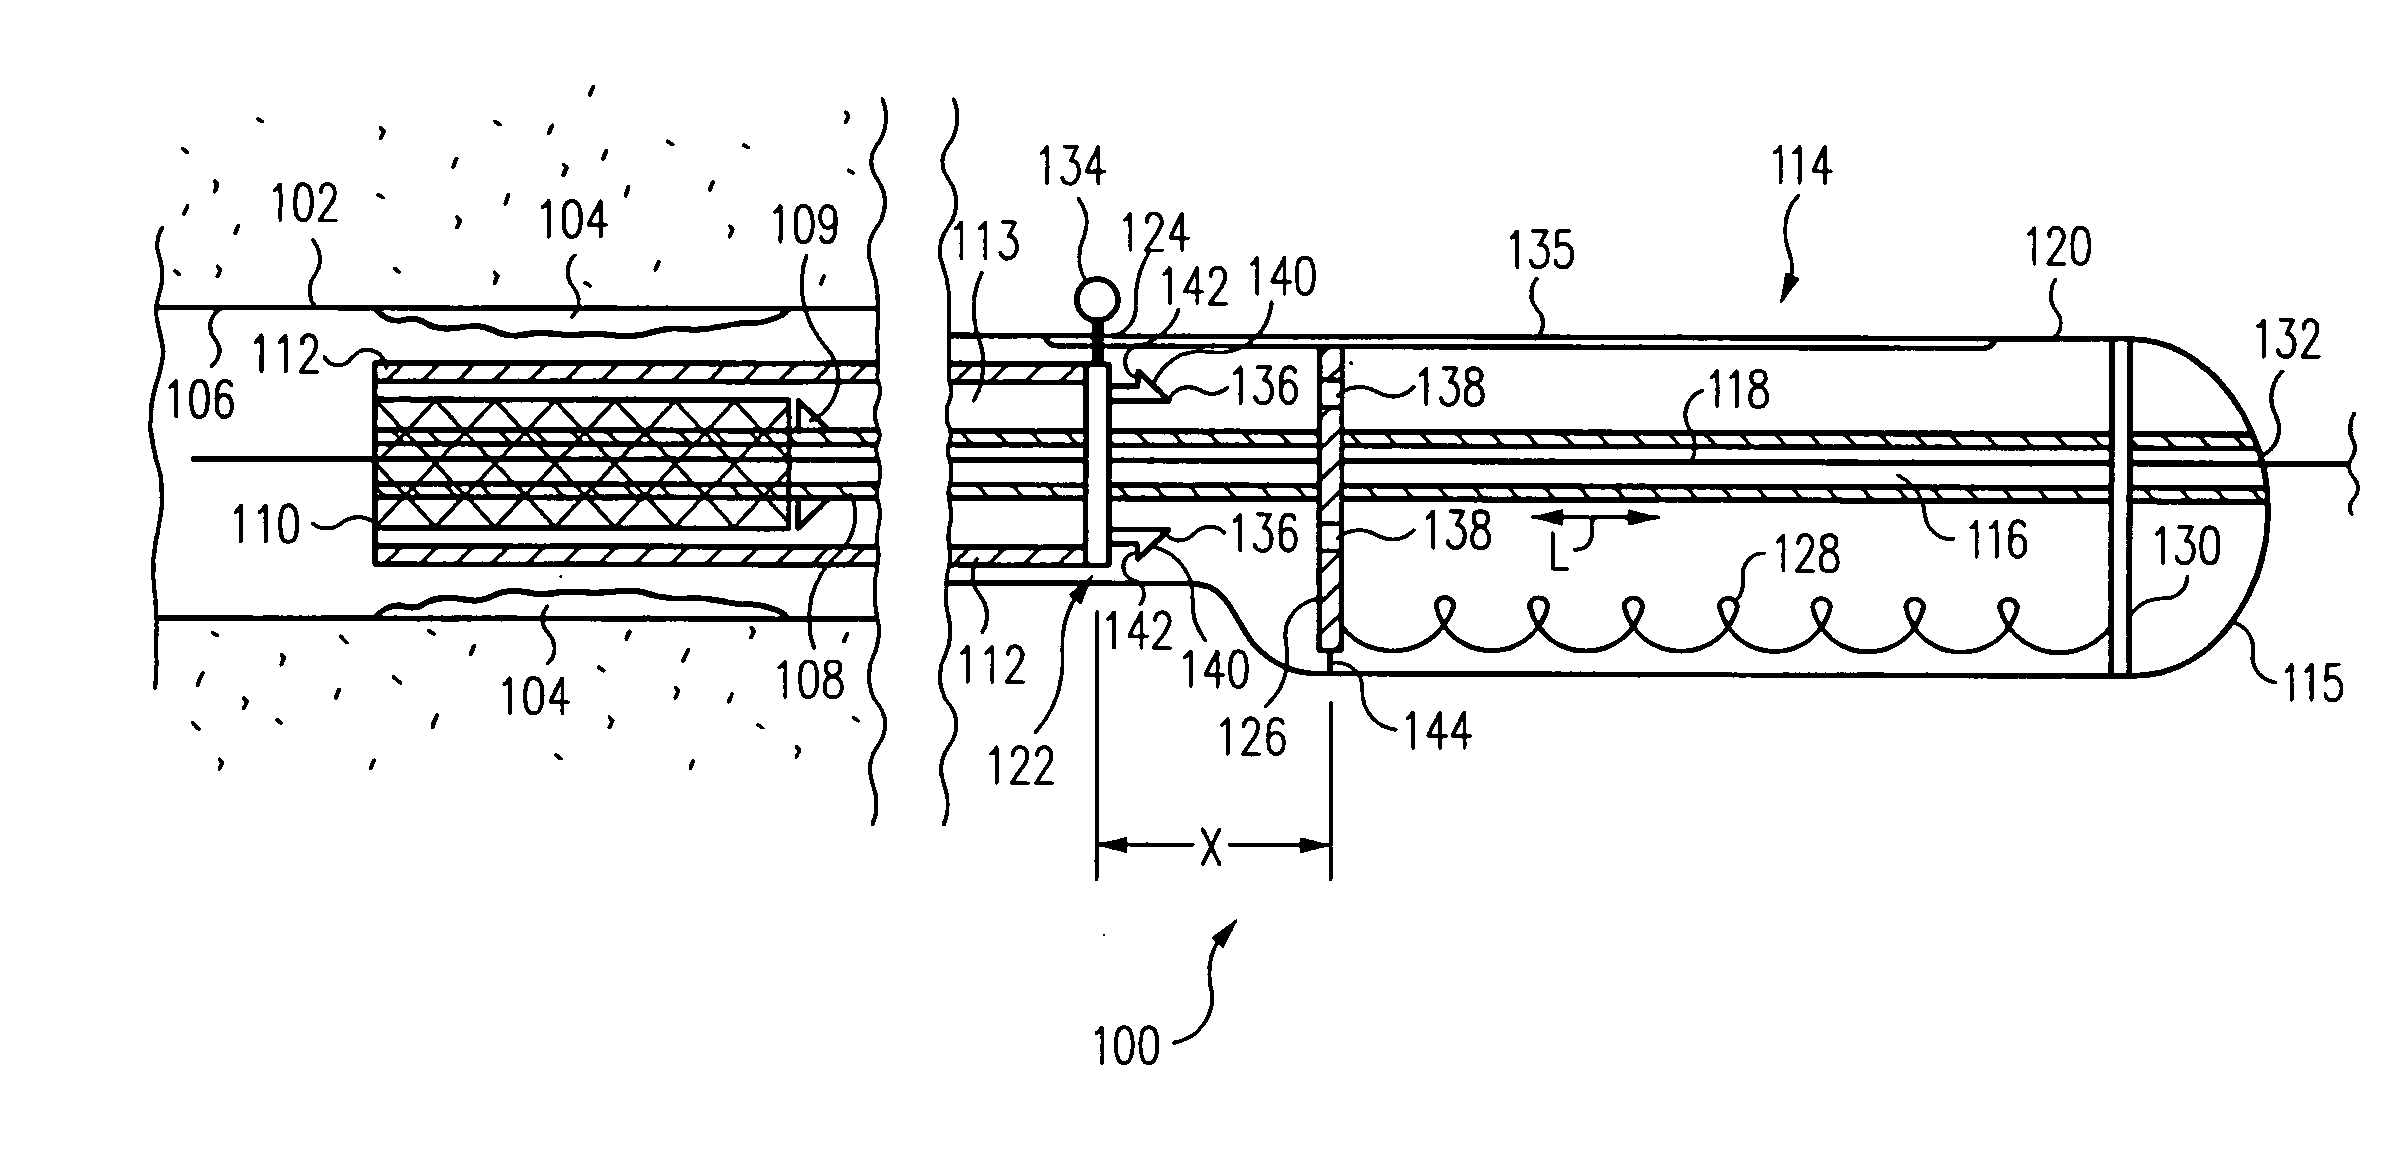 Delivery system for long self-expanding stents